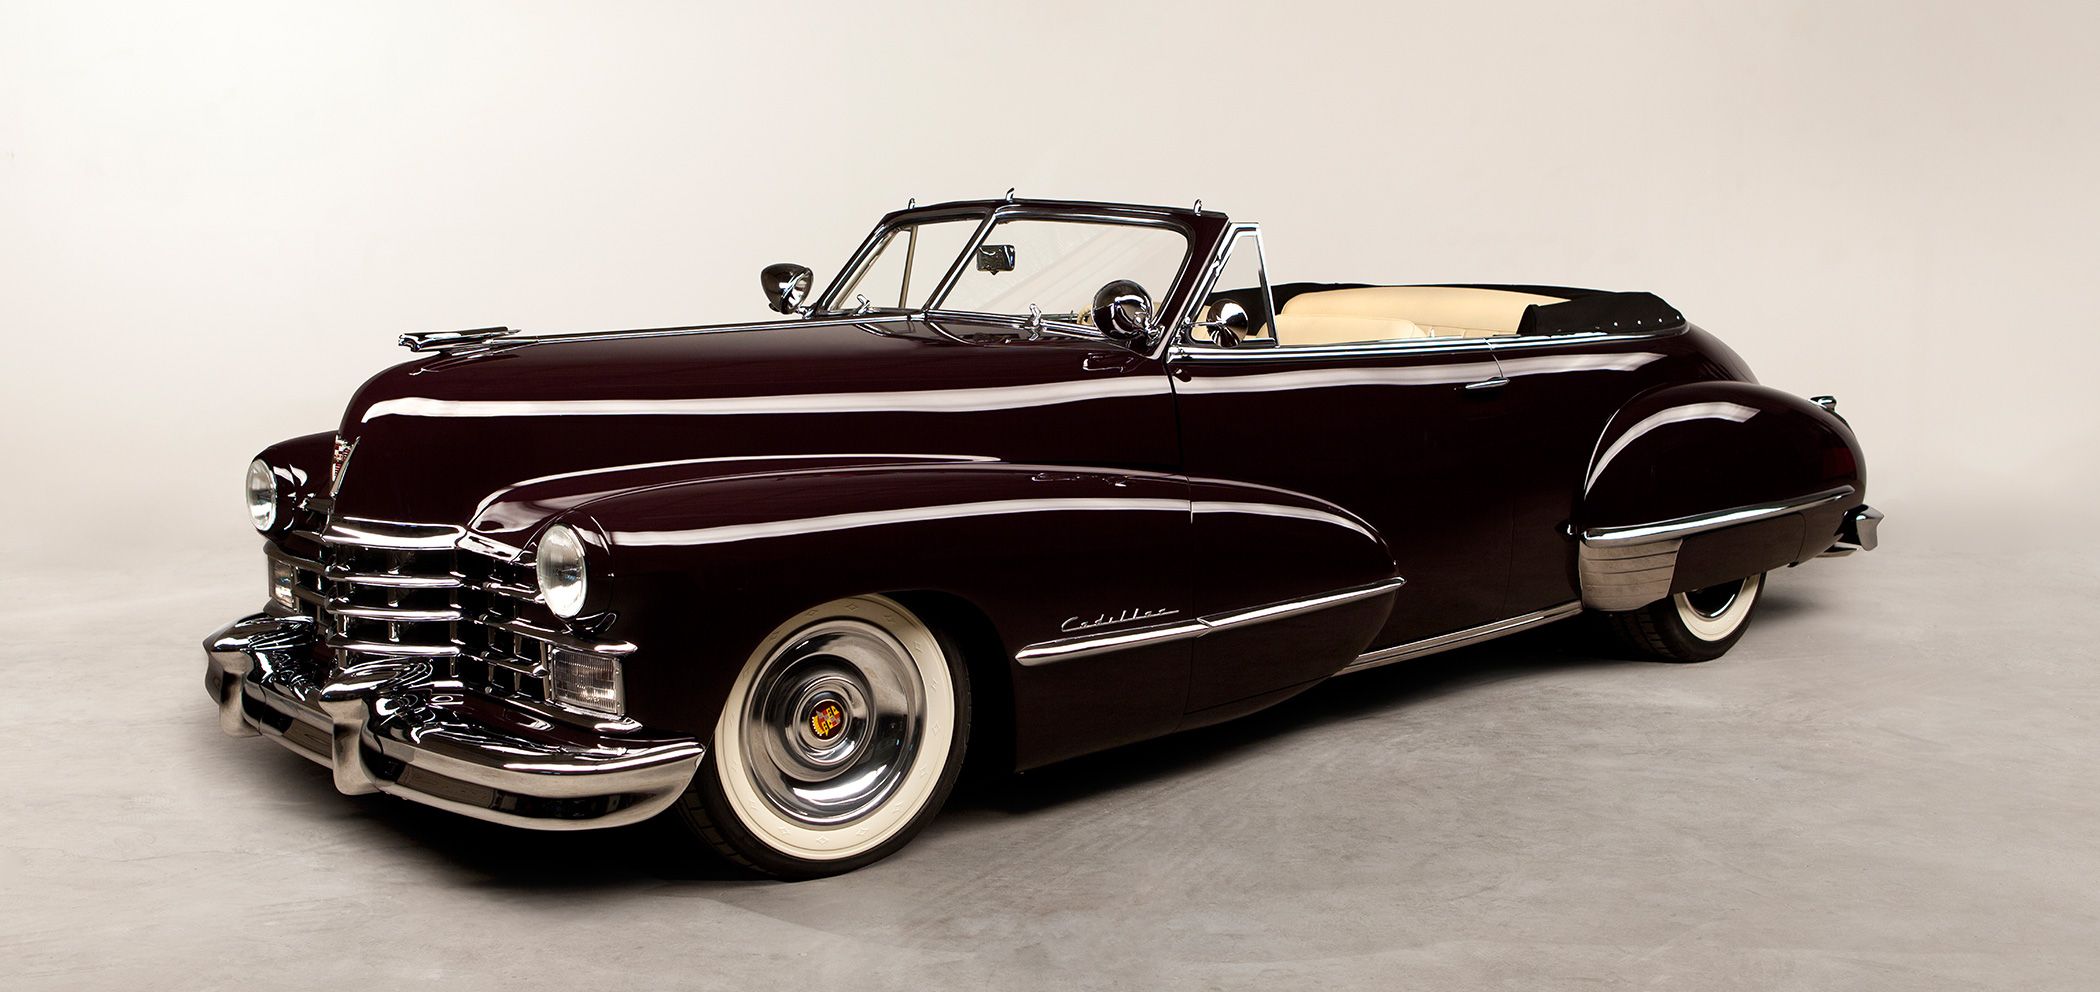 Cool Caddy Convertible